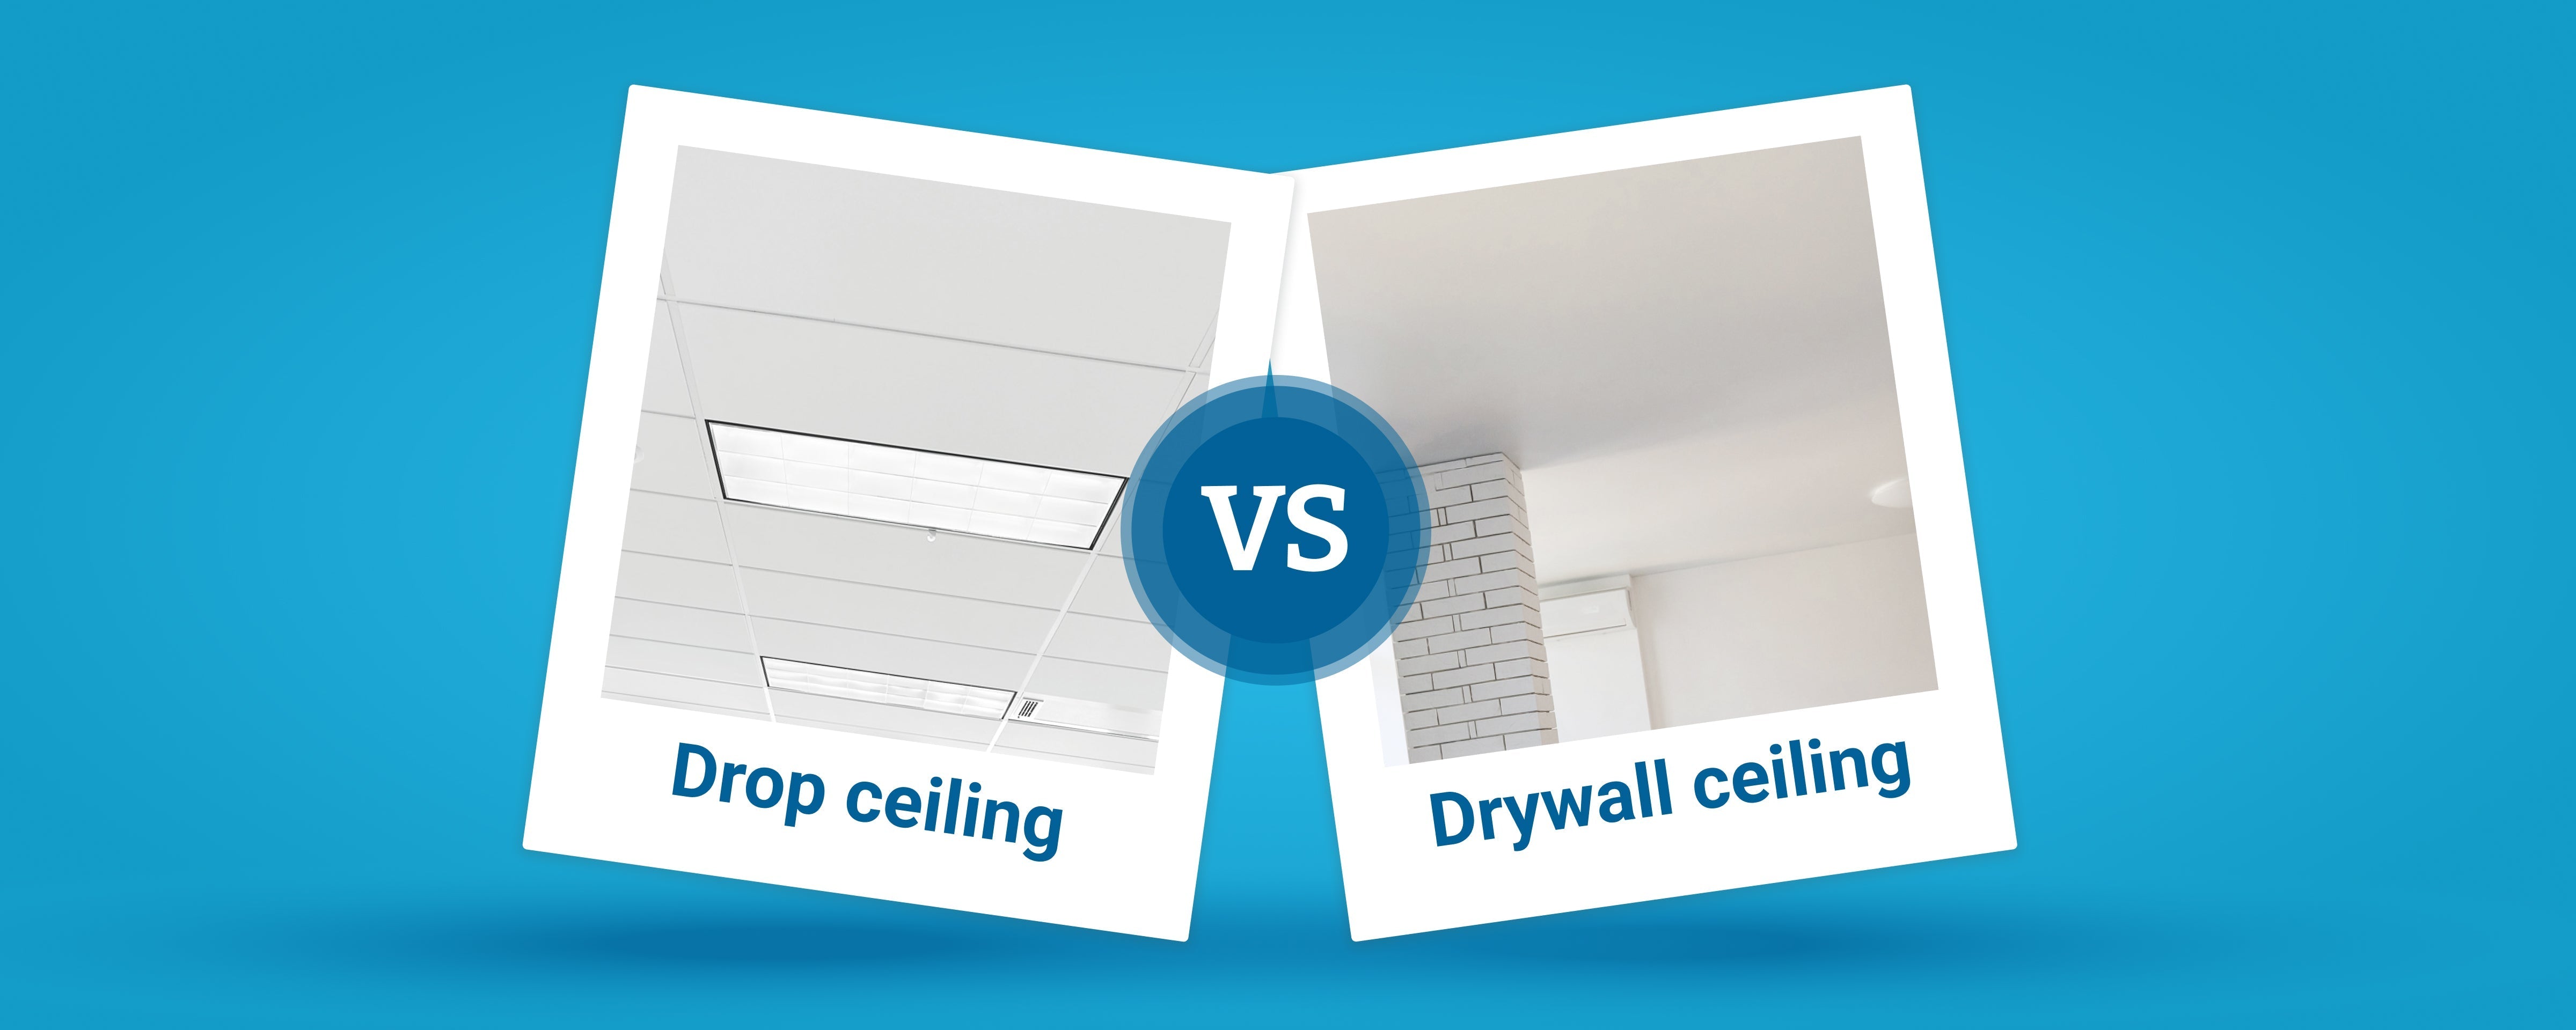 Drop ceiling vs drywall ceiling: Which is better?